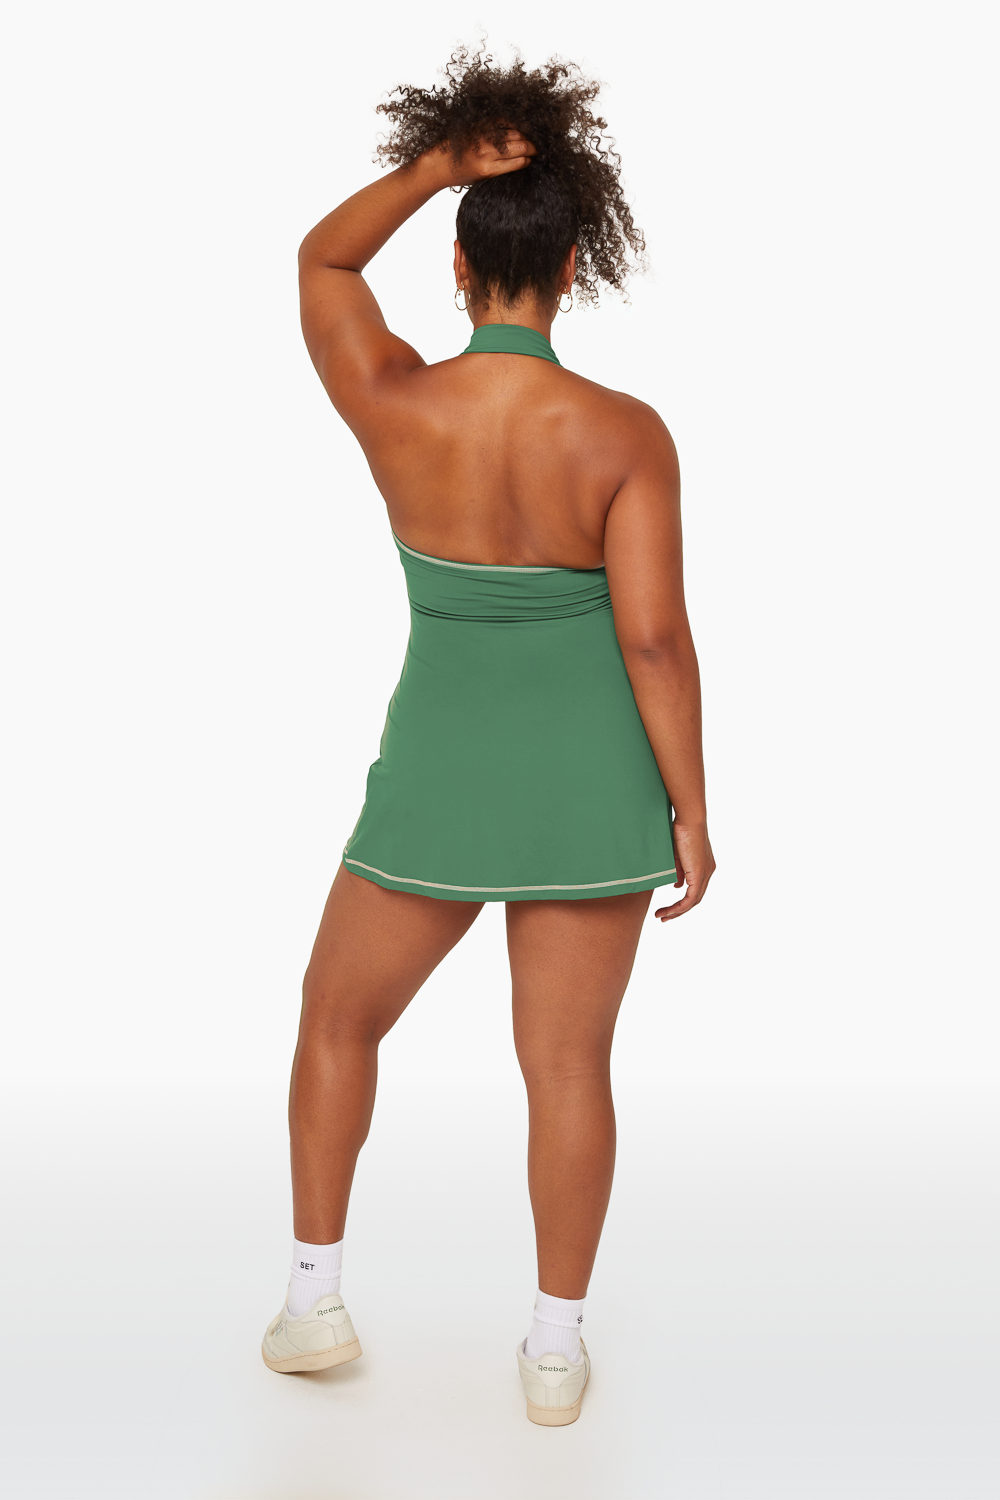 SET ACTIVE SPORTBODY® COLLARED V DRESS IN COURT